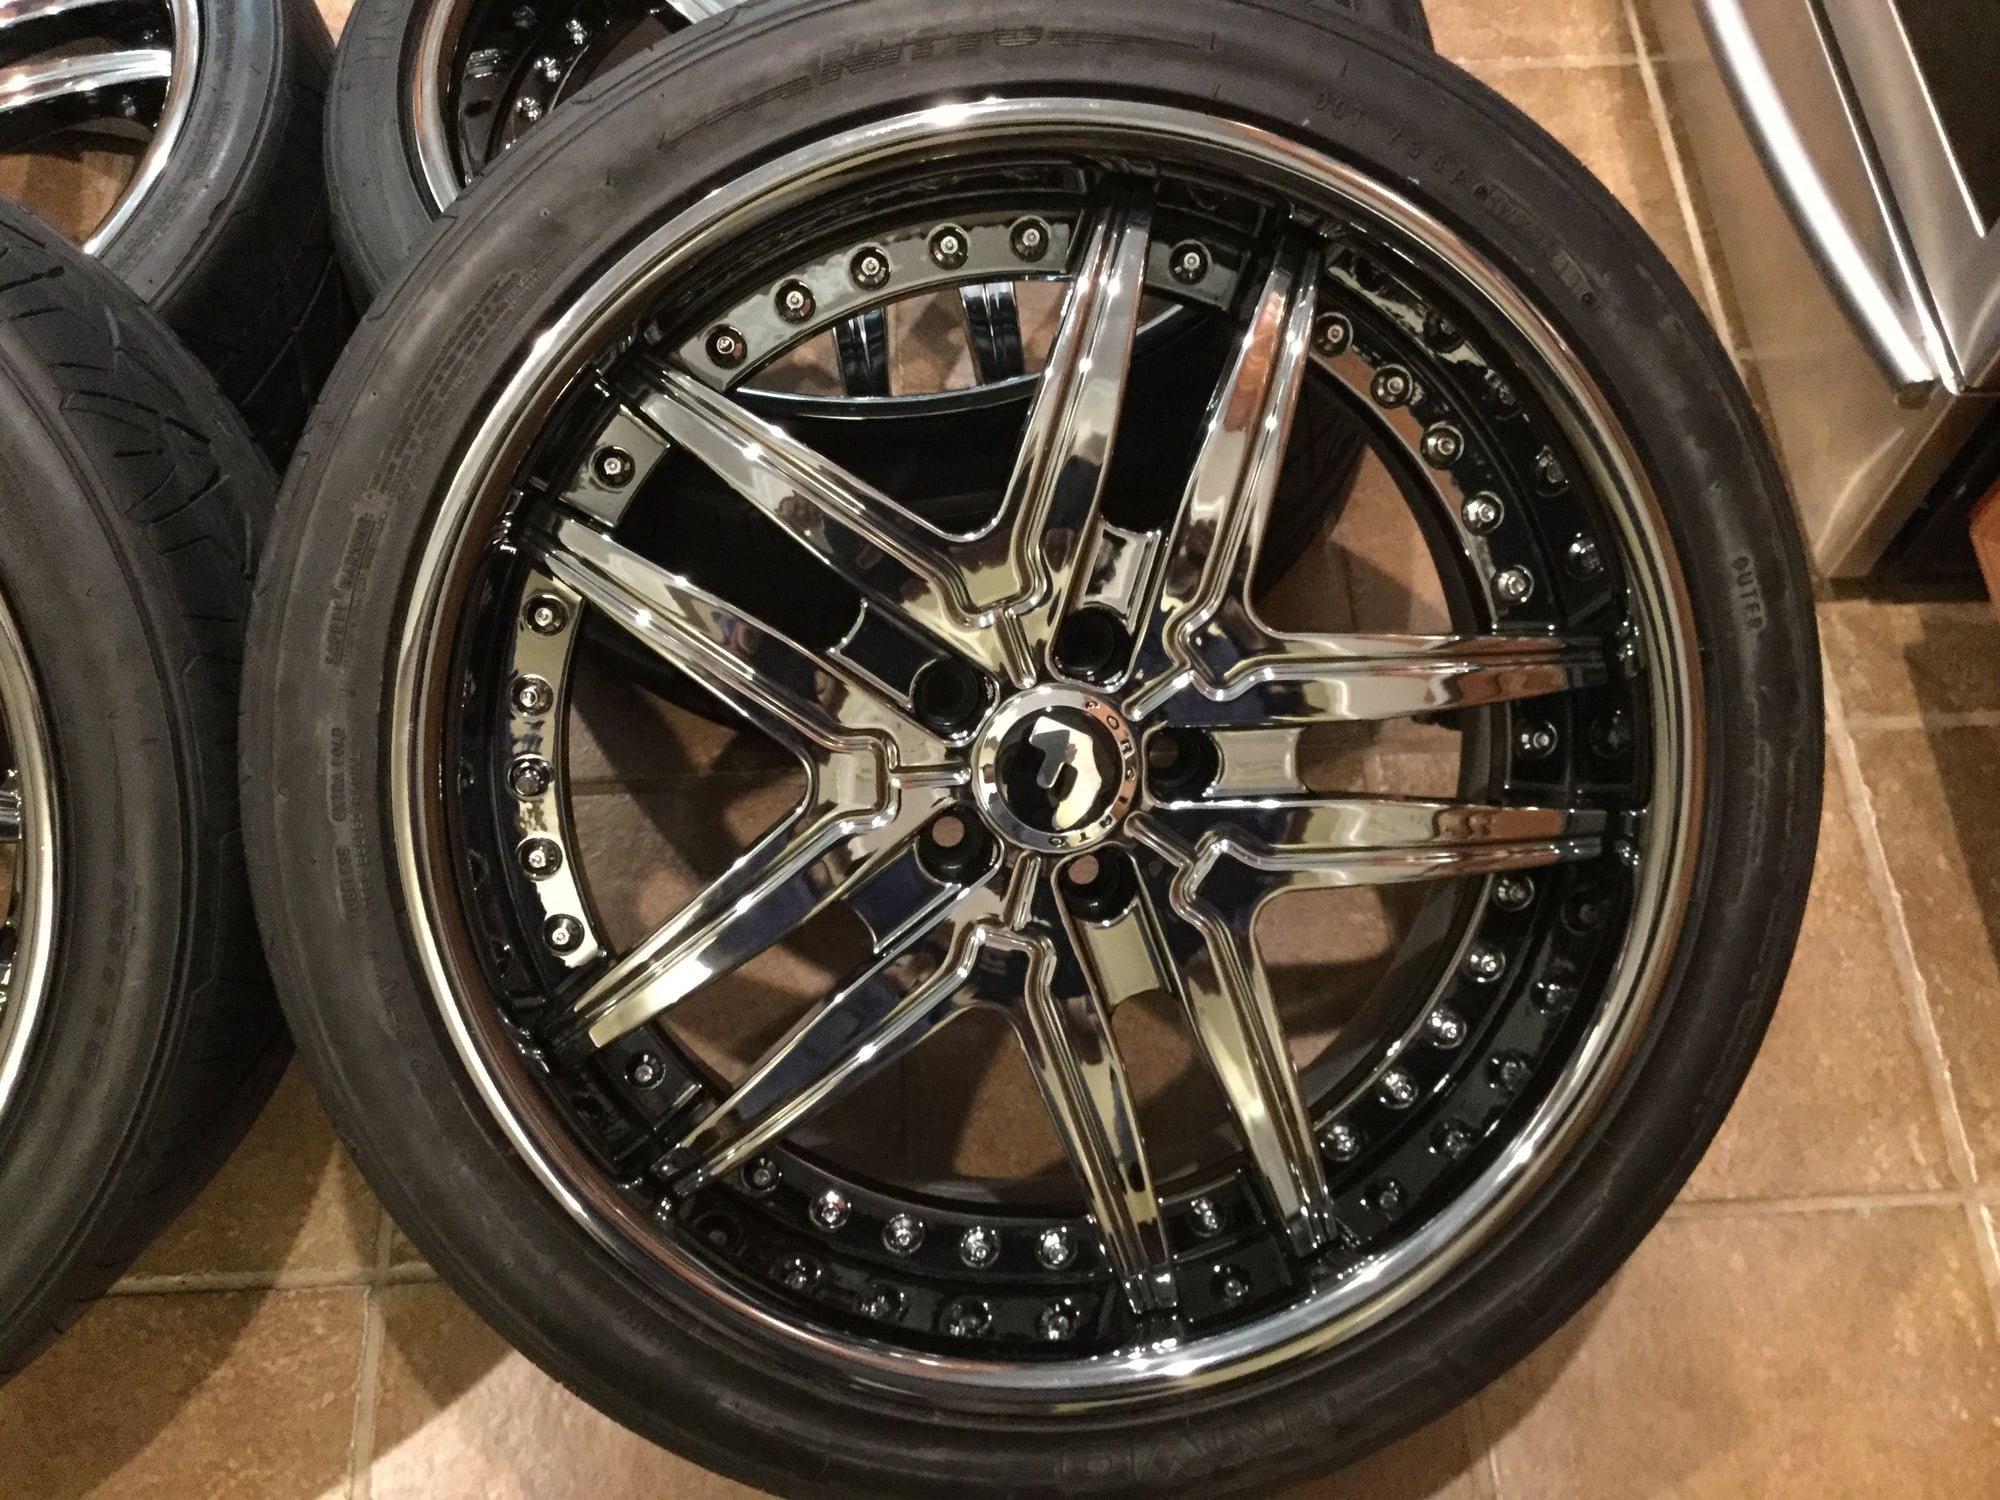 Wheels and Tires/Axles - 20" FORGIATO BLACK CHROME WHEELS/TIRES MERCEDES CL65 / S65 - Used - 2005 to 2006 Mercedes-Benz CL65 AMG - 2006 Mercedes-Benz S65 AMG - Huntsville, AL 35824, United States